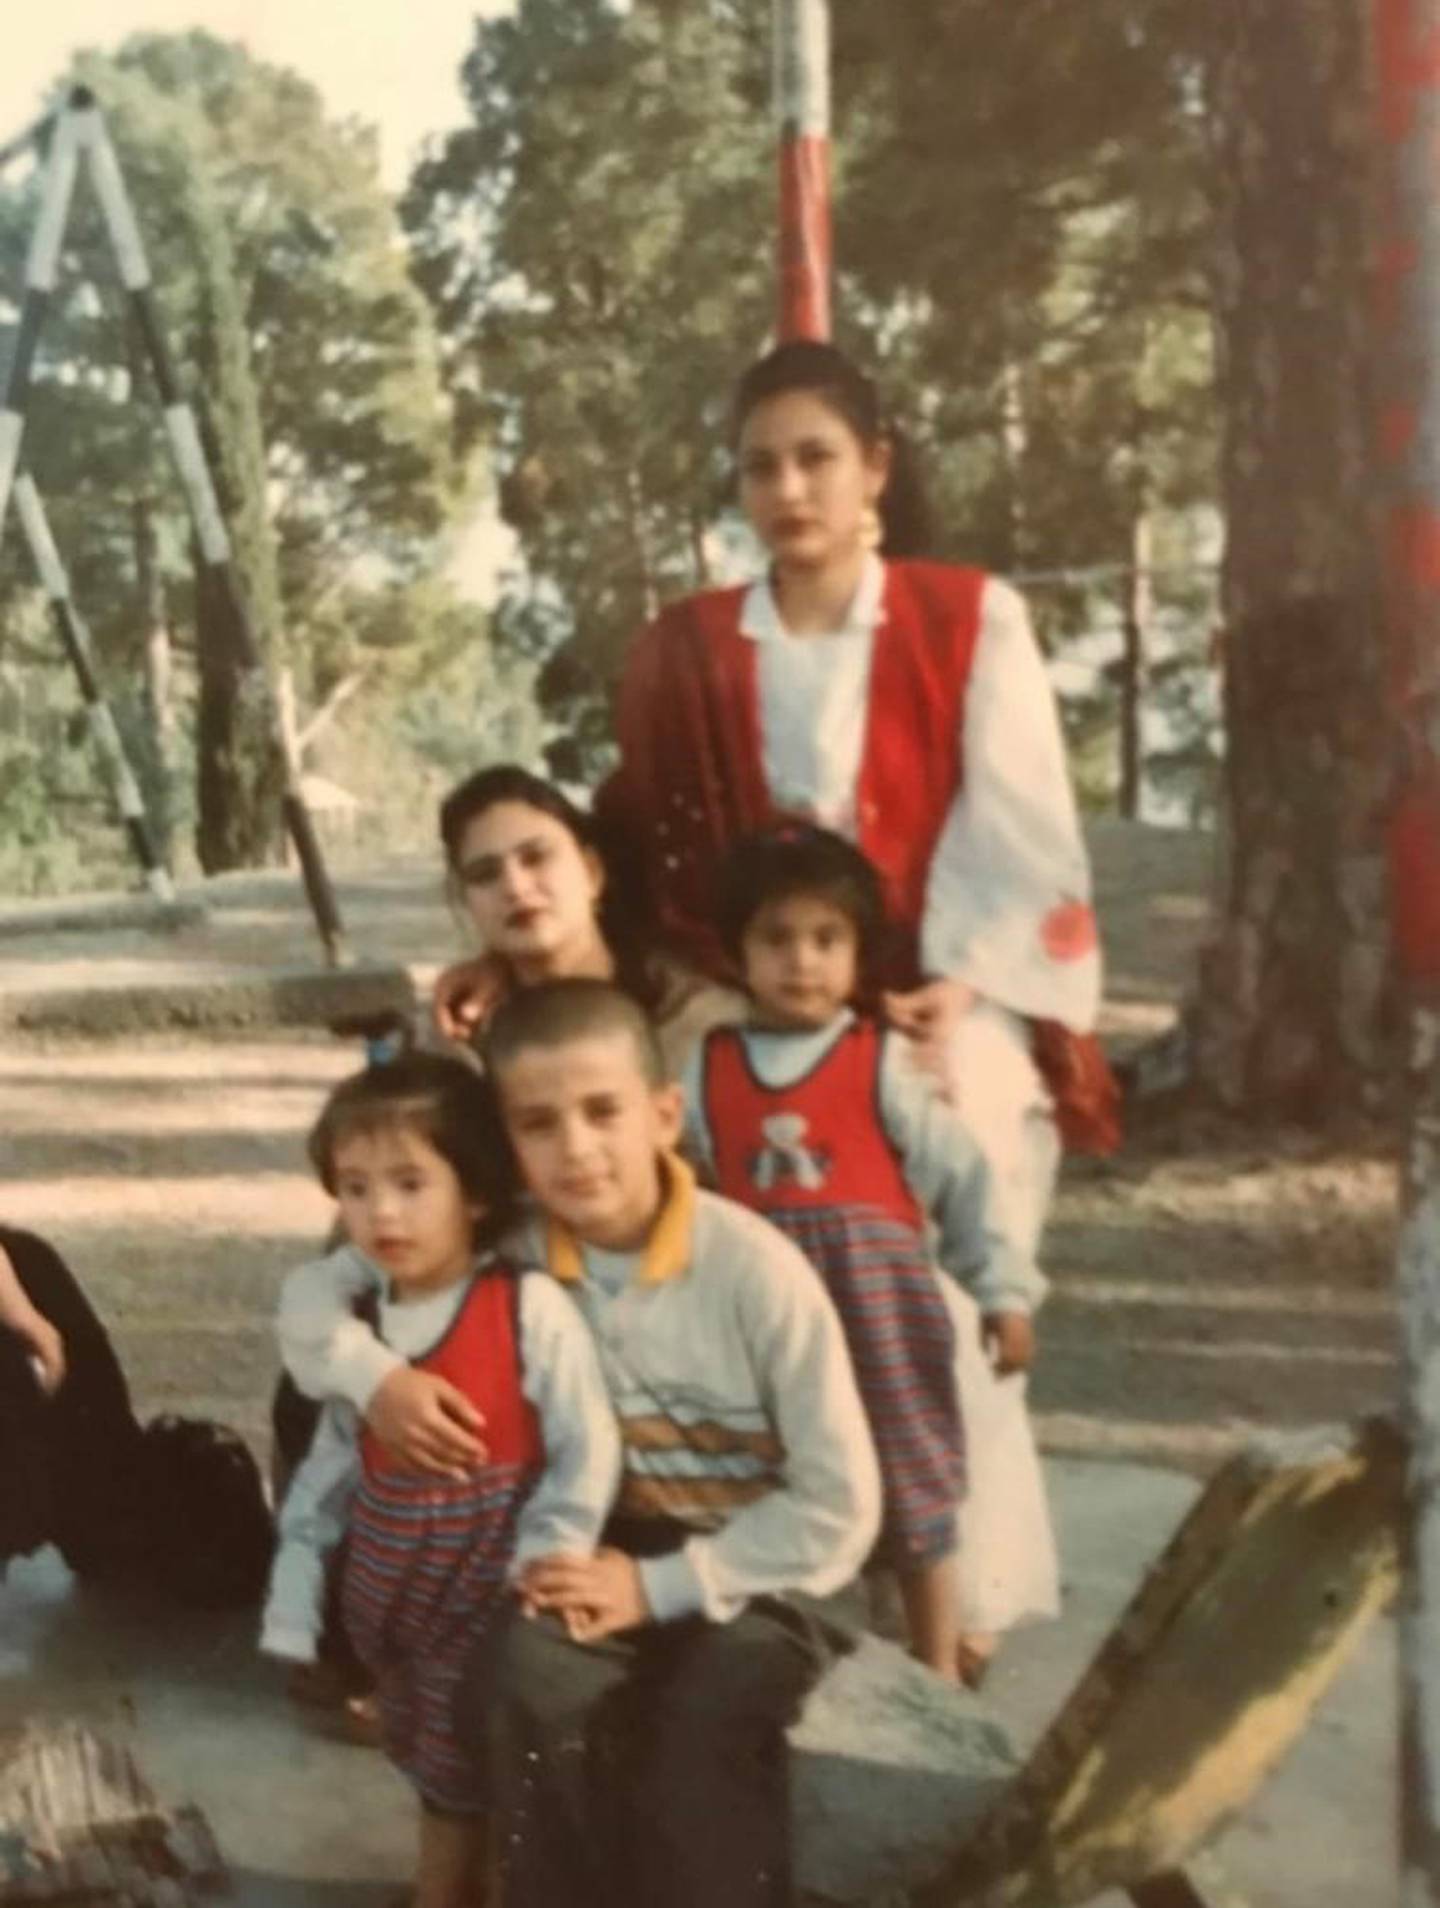 Lida Nasiri, on the right in the red bib, with her mother and family members in Turkmenistan, when Lida was 2 years old. Photo: Lida Nasiri